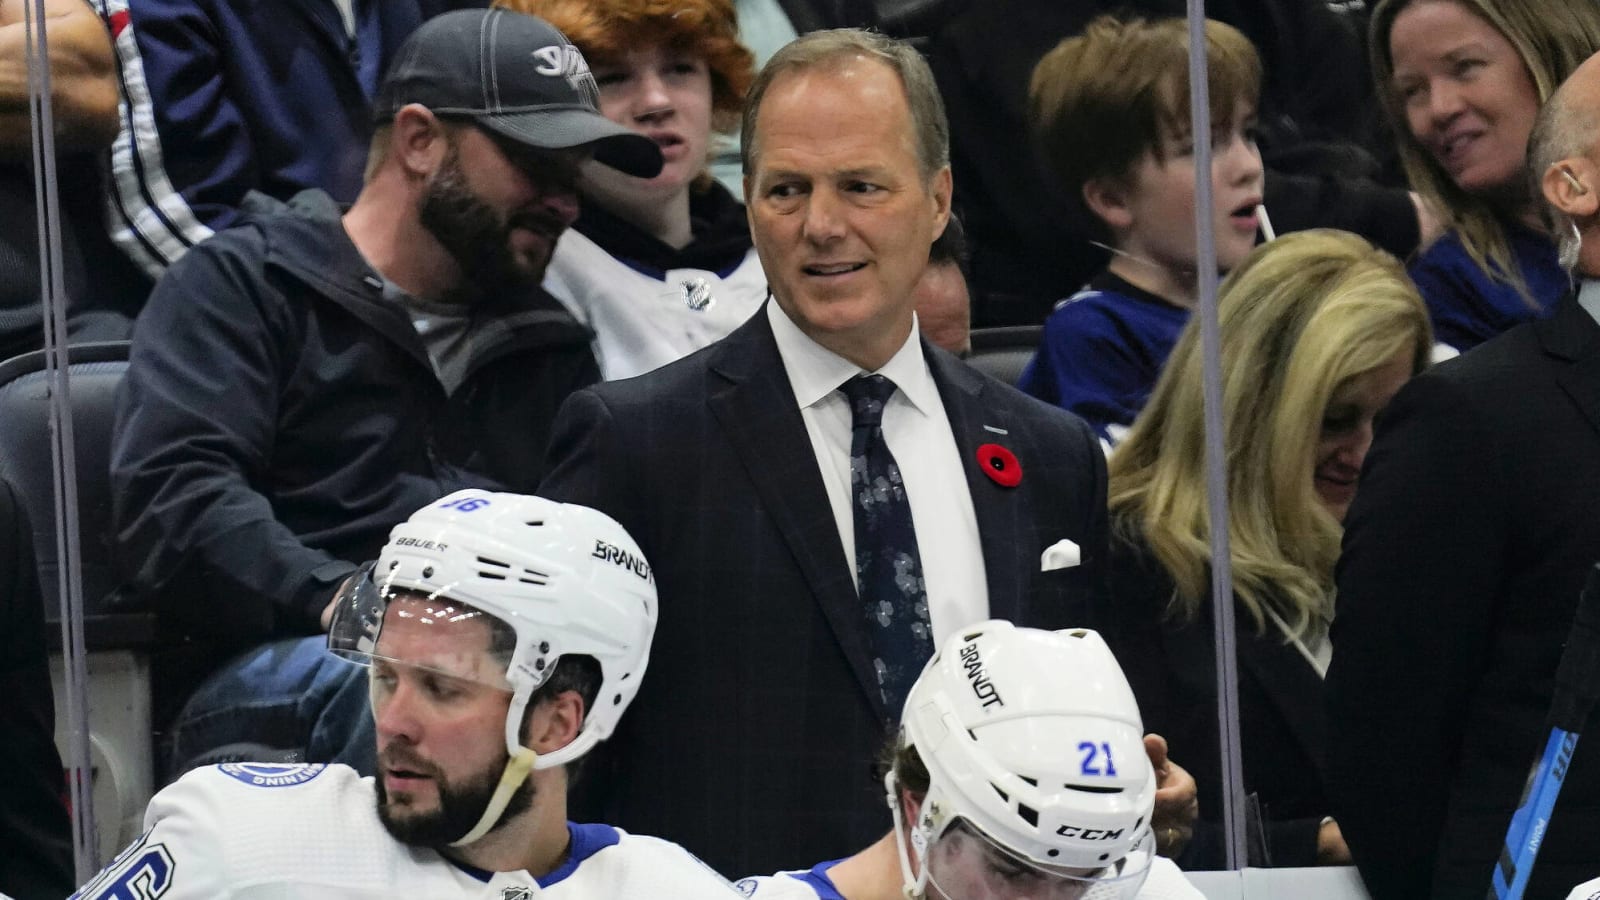 Canada’s 2026 Olympic Team Should Be Coached by Jon Cooper